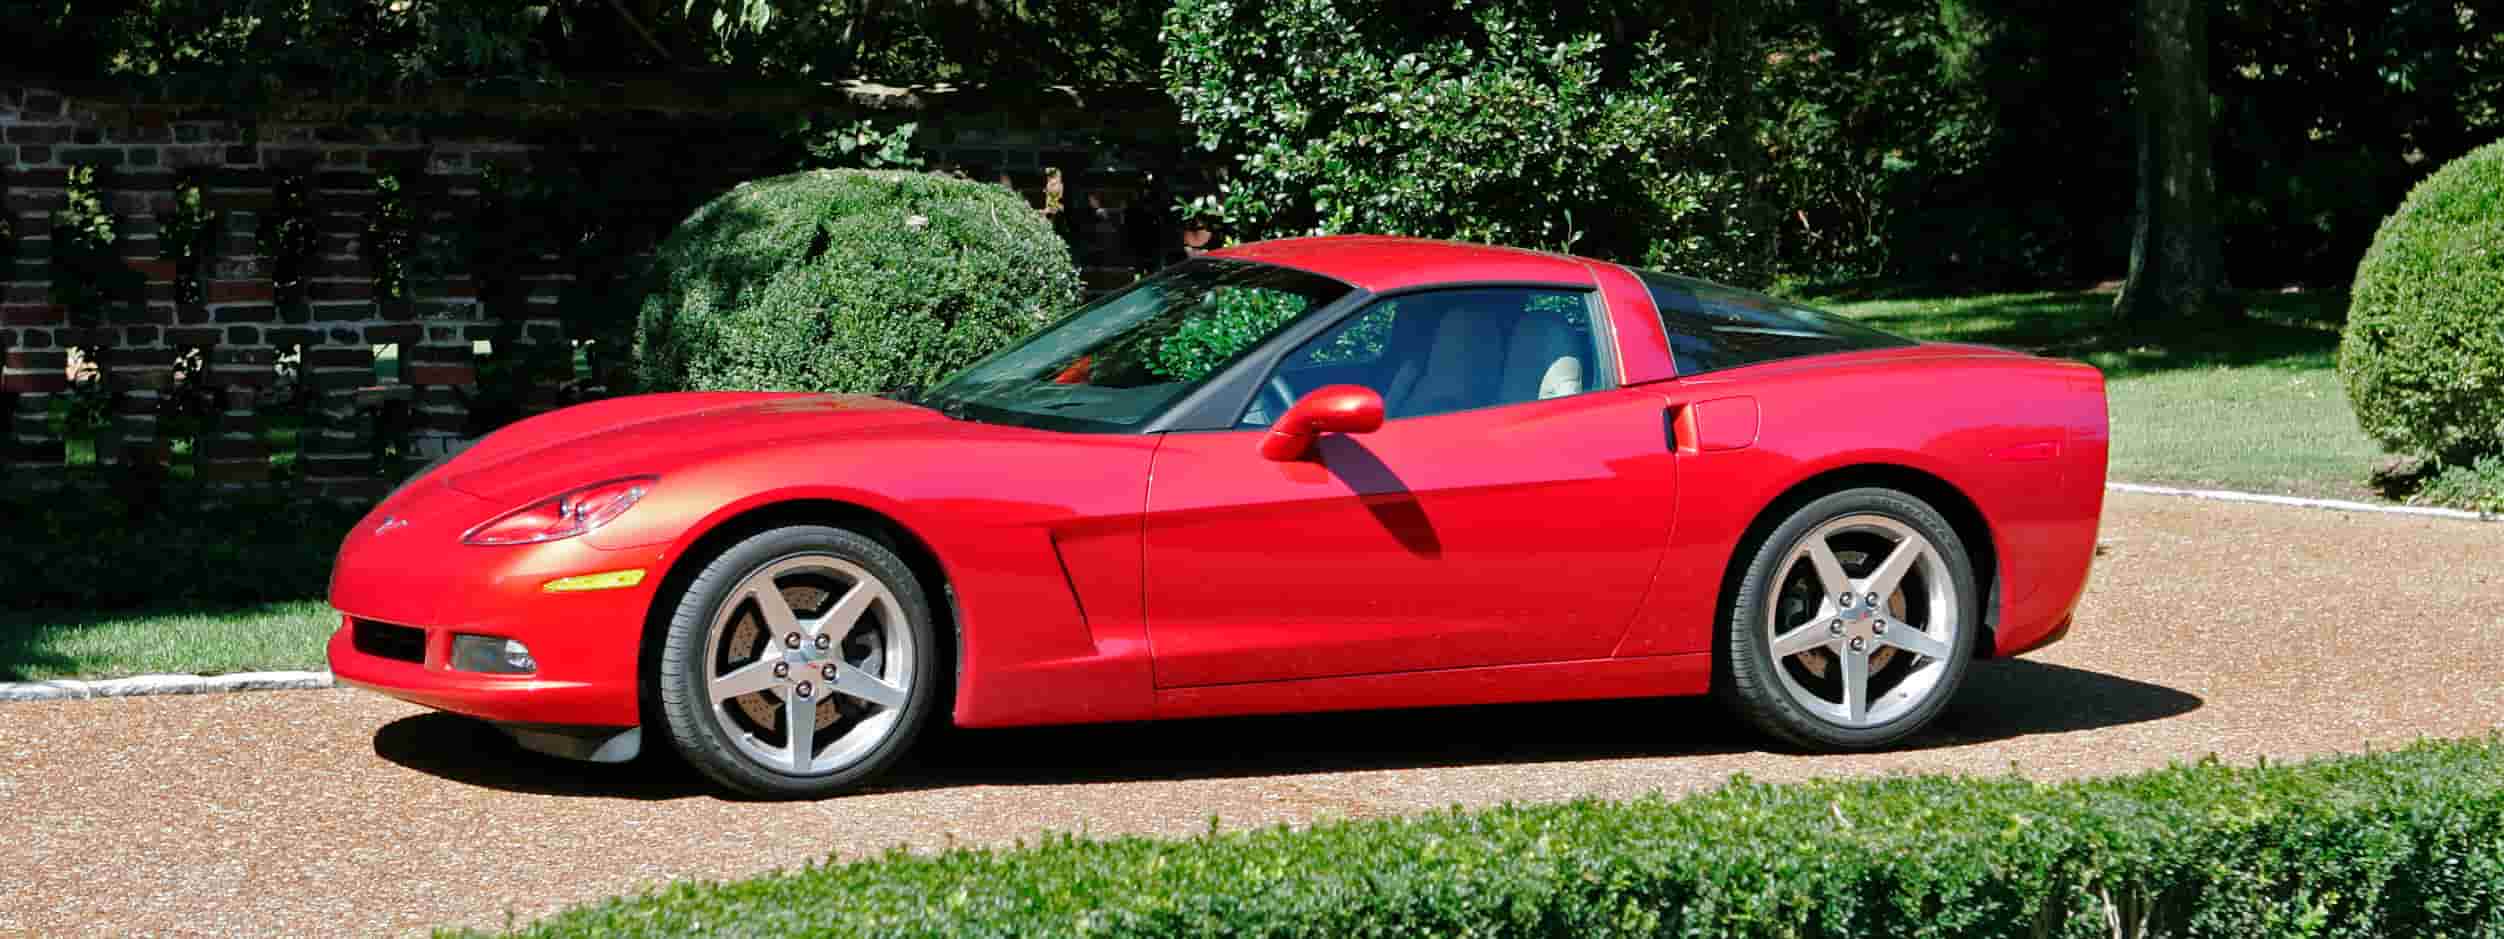 A red Chevy Corvette sits in a driveway.